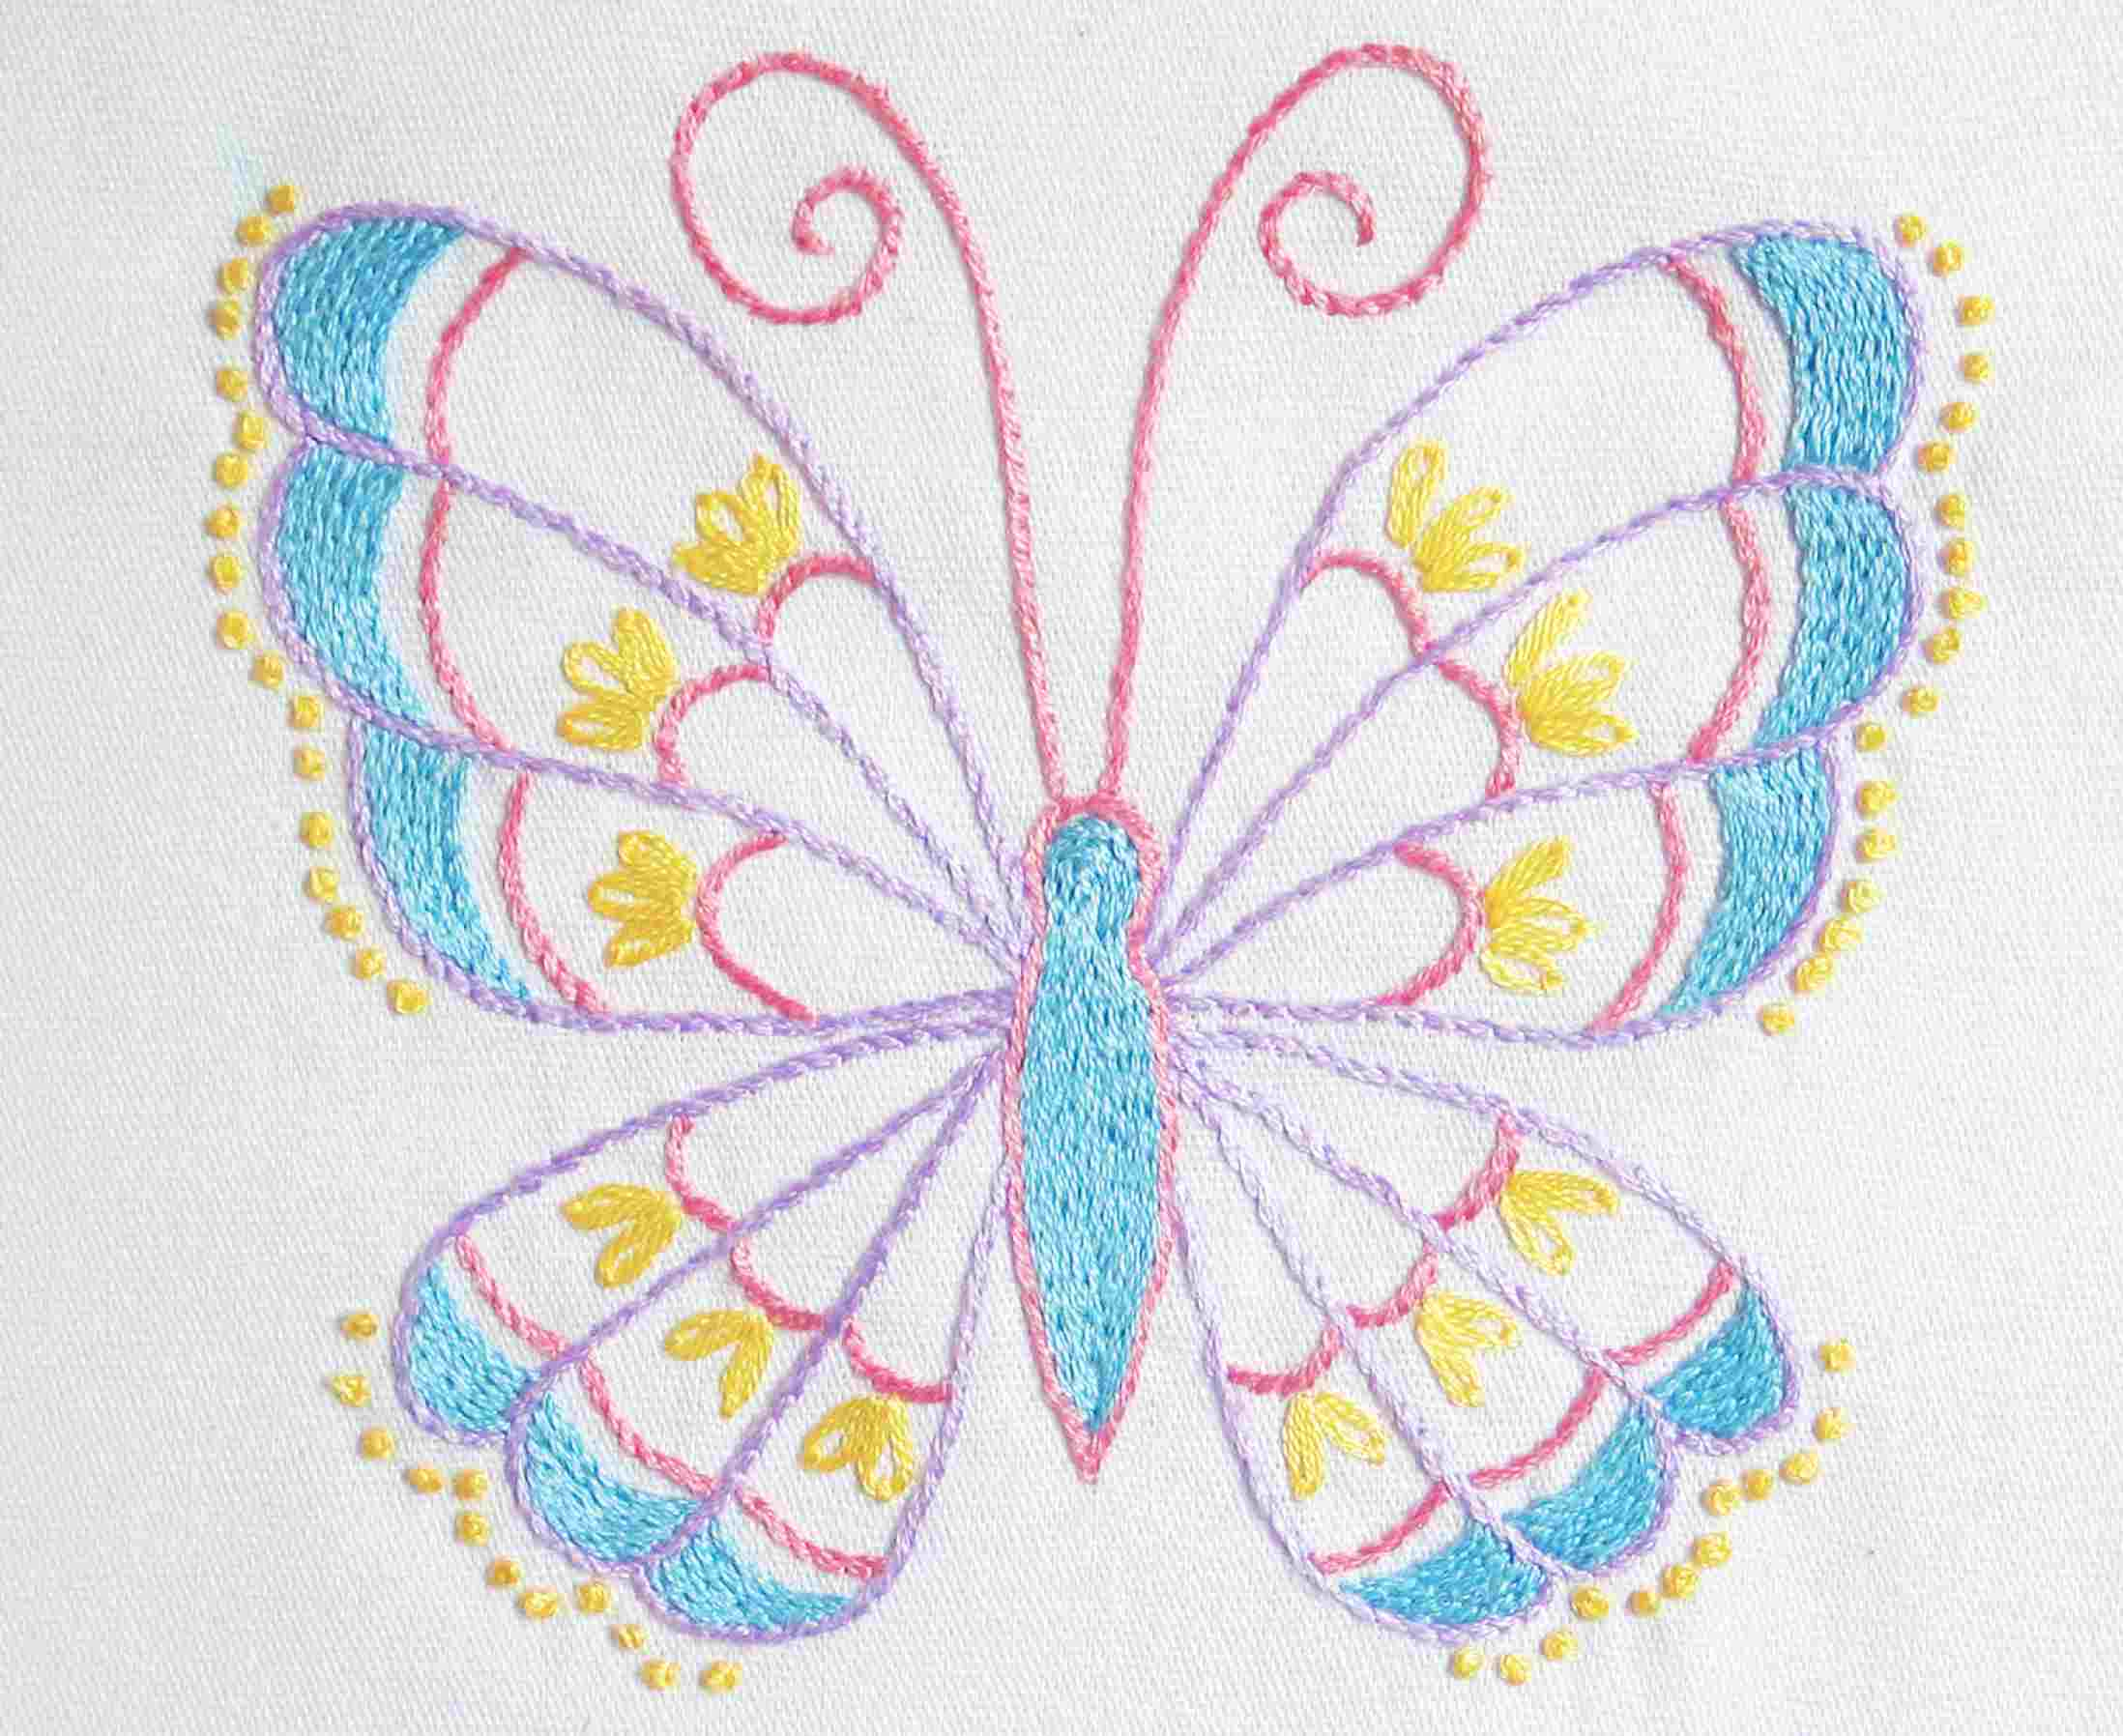 Hand Embroidery Patterns Baby Our Top 25 Free Embroidery Designs